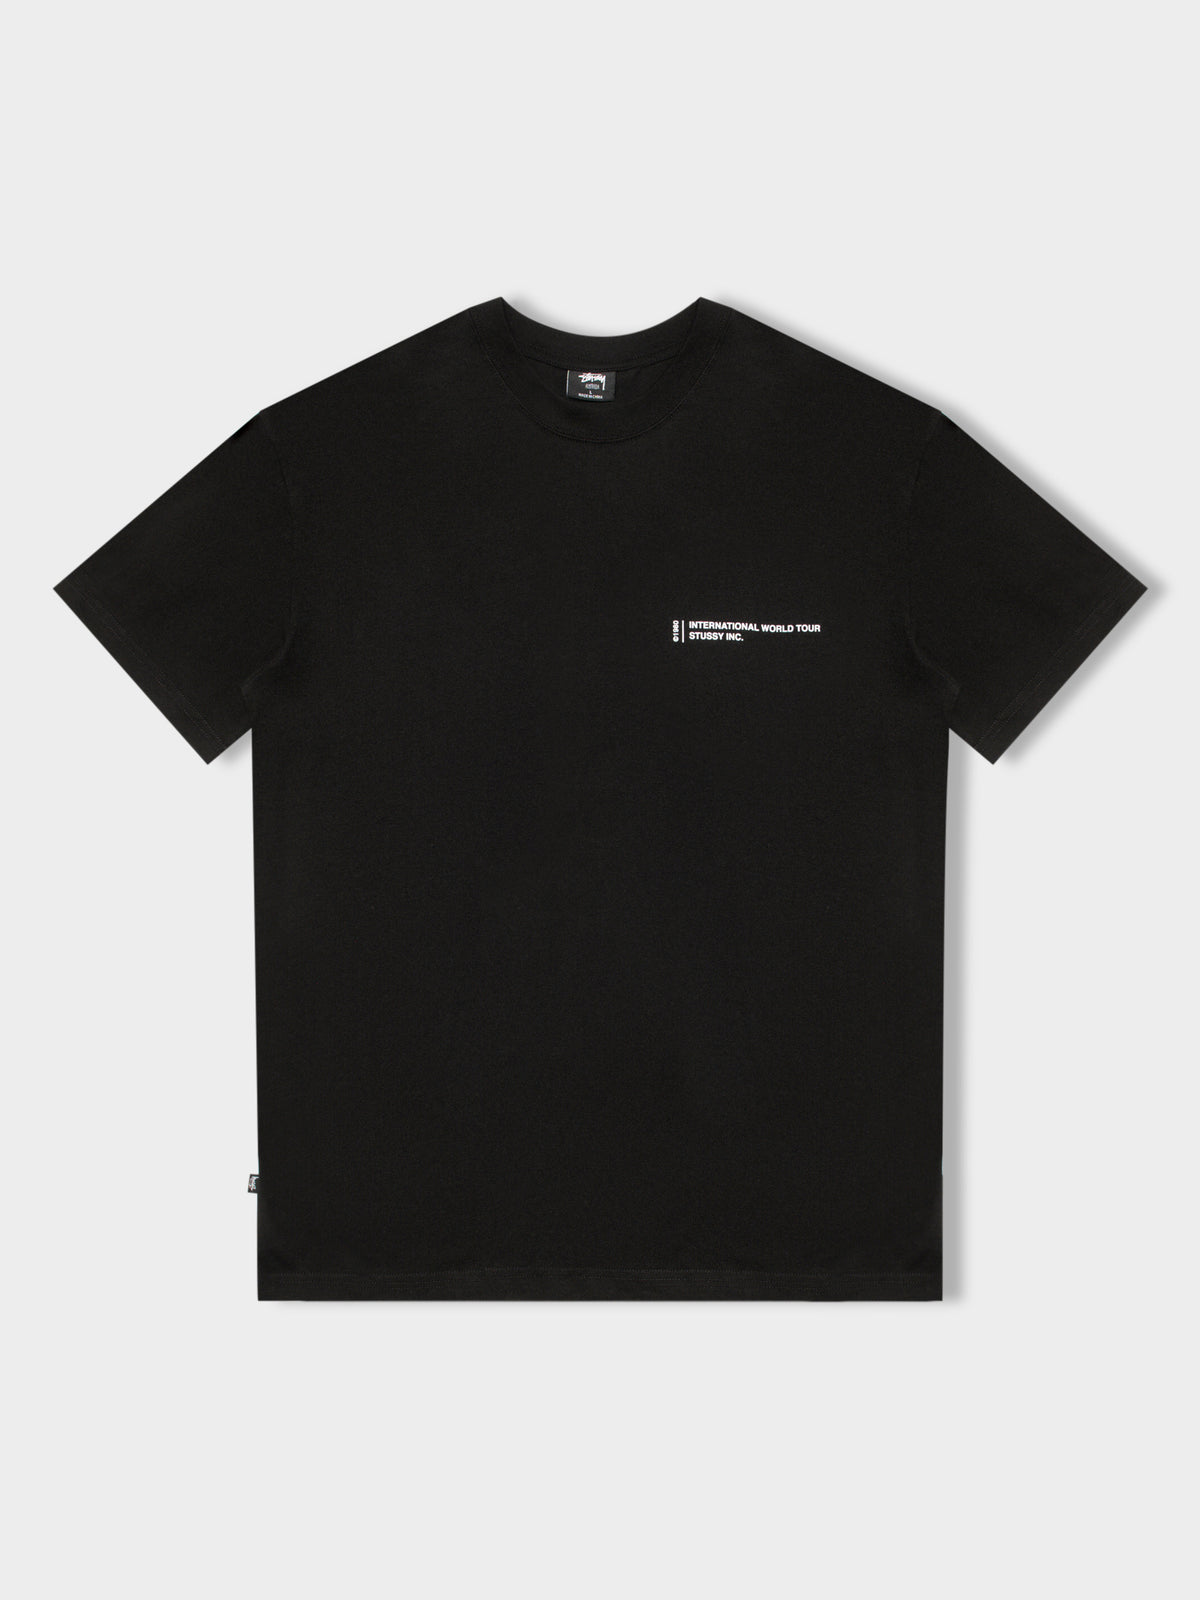 Earth 50 T-Shirt in Black